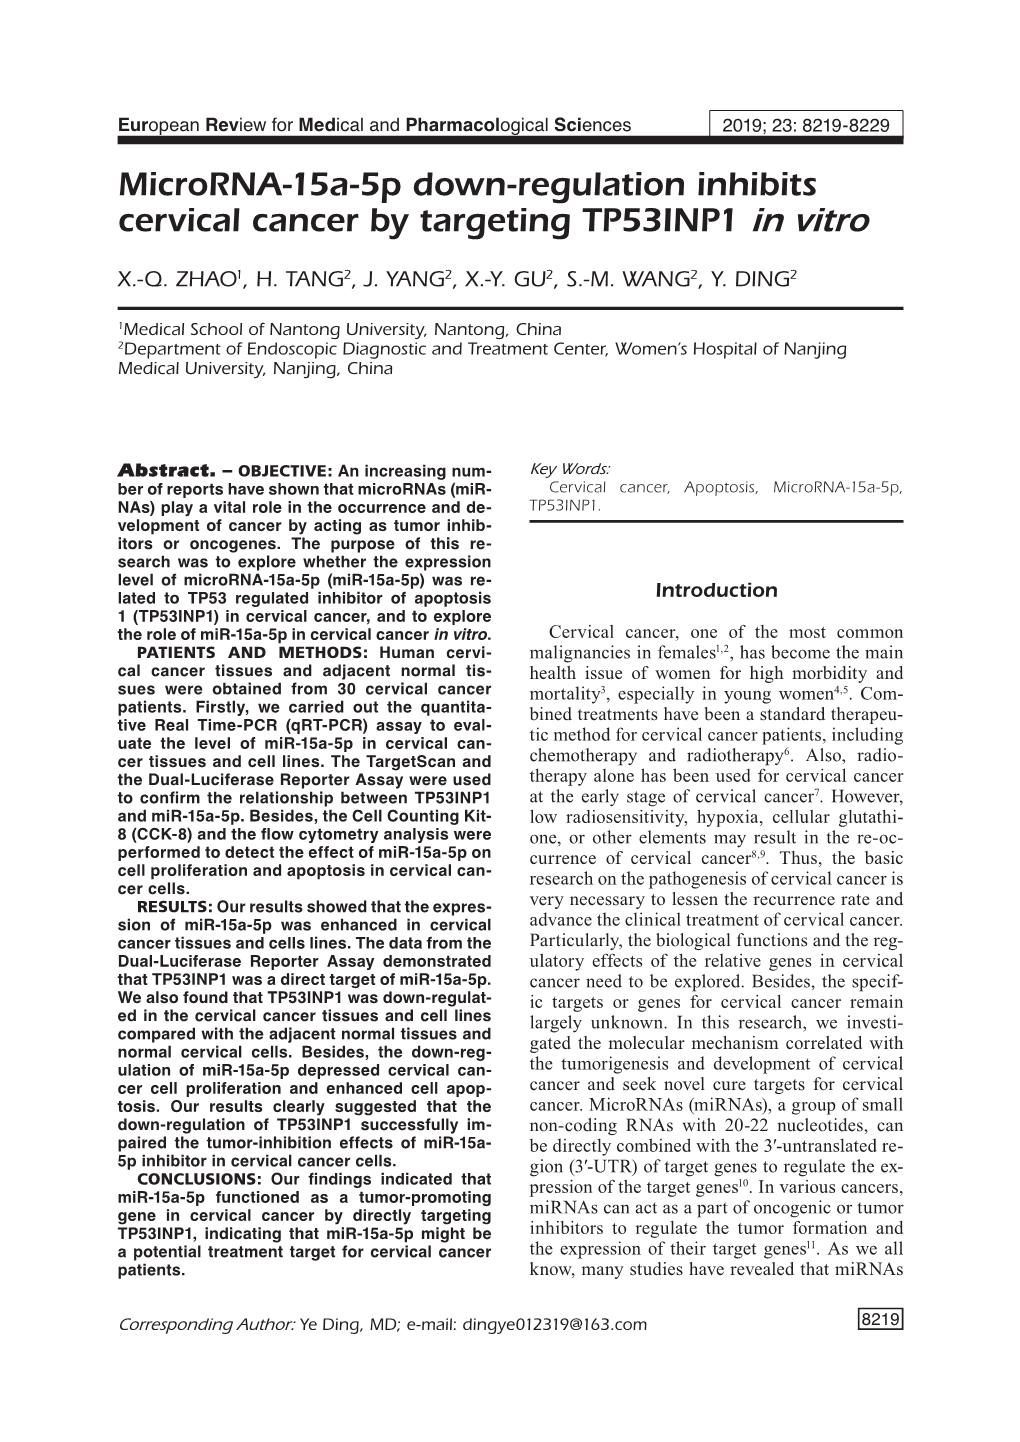 Microrna-15A-5P Down-Regulation Inhibits Cervical Cancer by Targeting TP53INP1 in Vitro